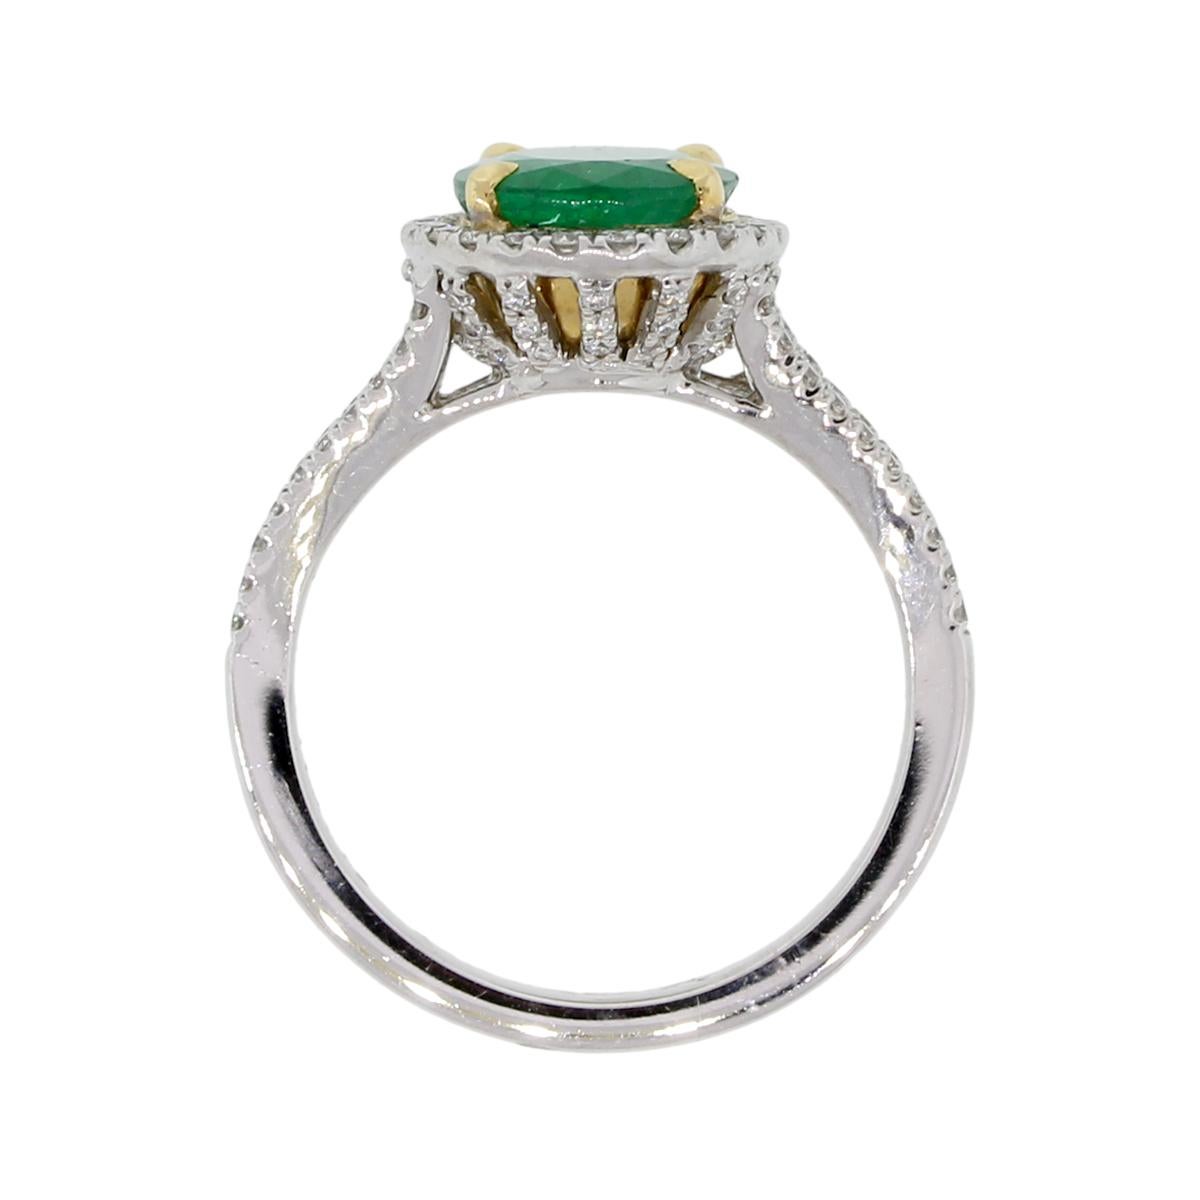 Material: 18k white gold
Gemstone Details: GIA certified 2.47ct oval shape emerald. GIA # 5182375725
Diamond Details: Approximately 0..48ctw of round brilliant diamonds. Diamonds are G/H in color and VS in clarity
Size: 6.5
Total Weight: 5.9g